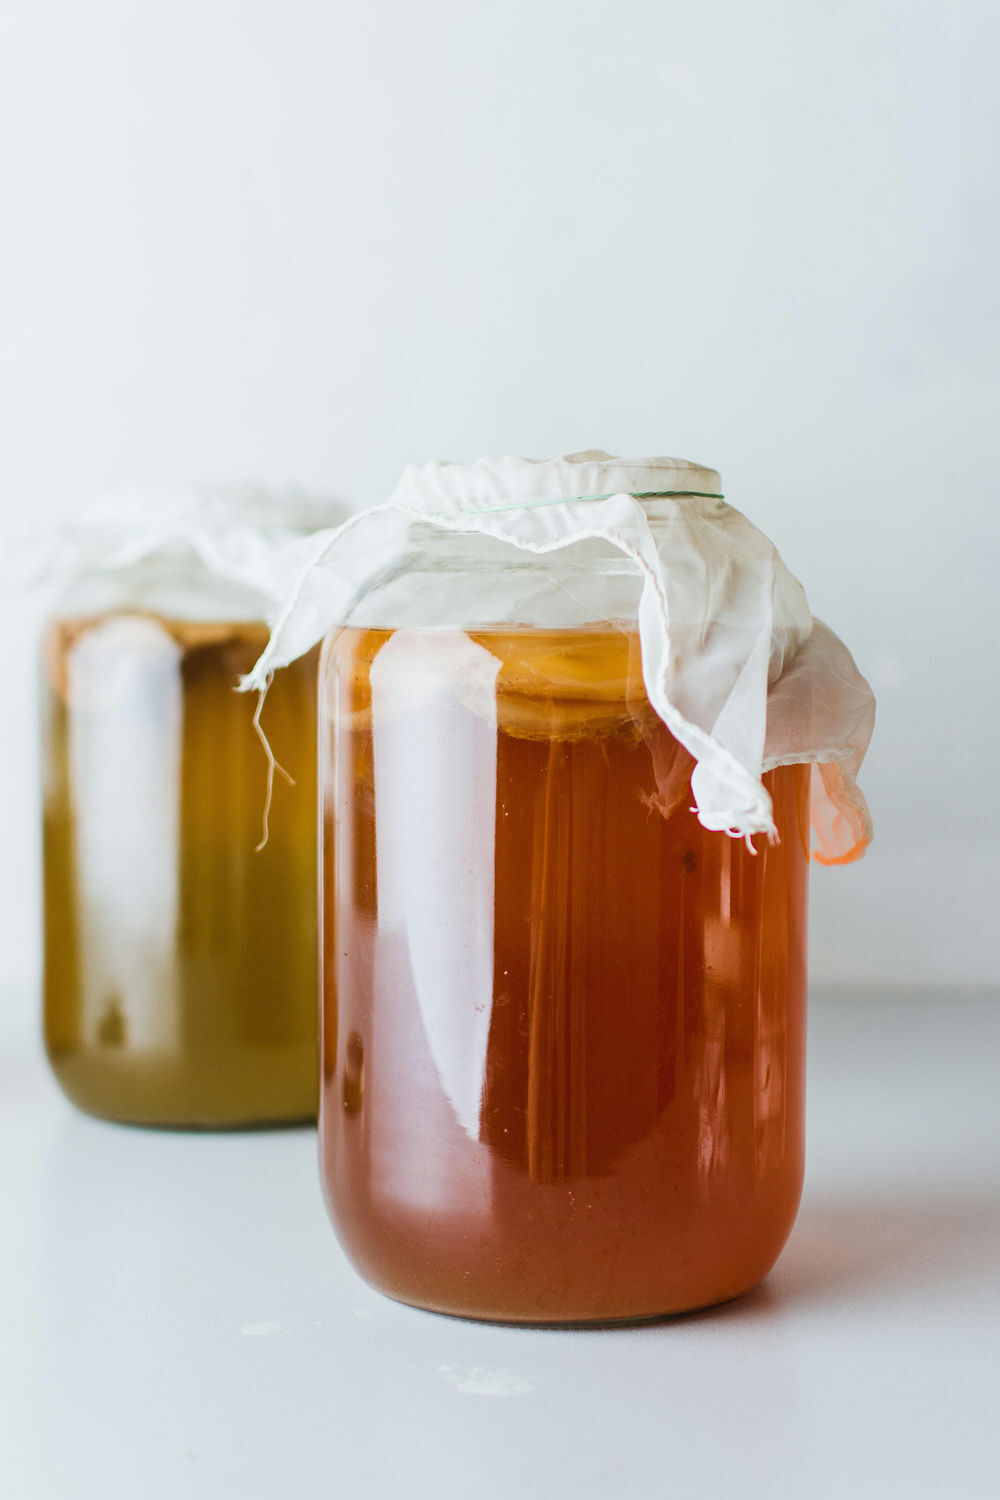 Kombucha in Jars with Cloth Covering